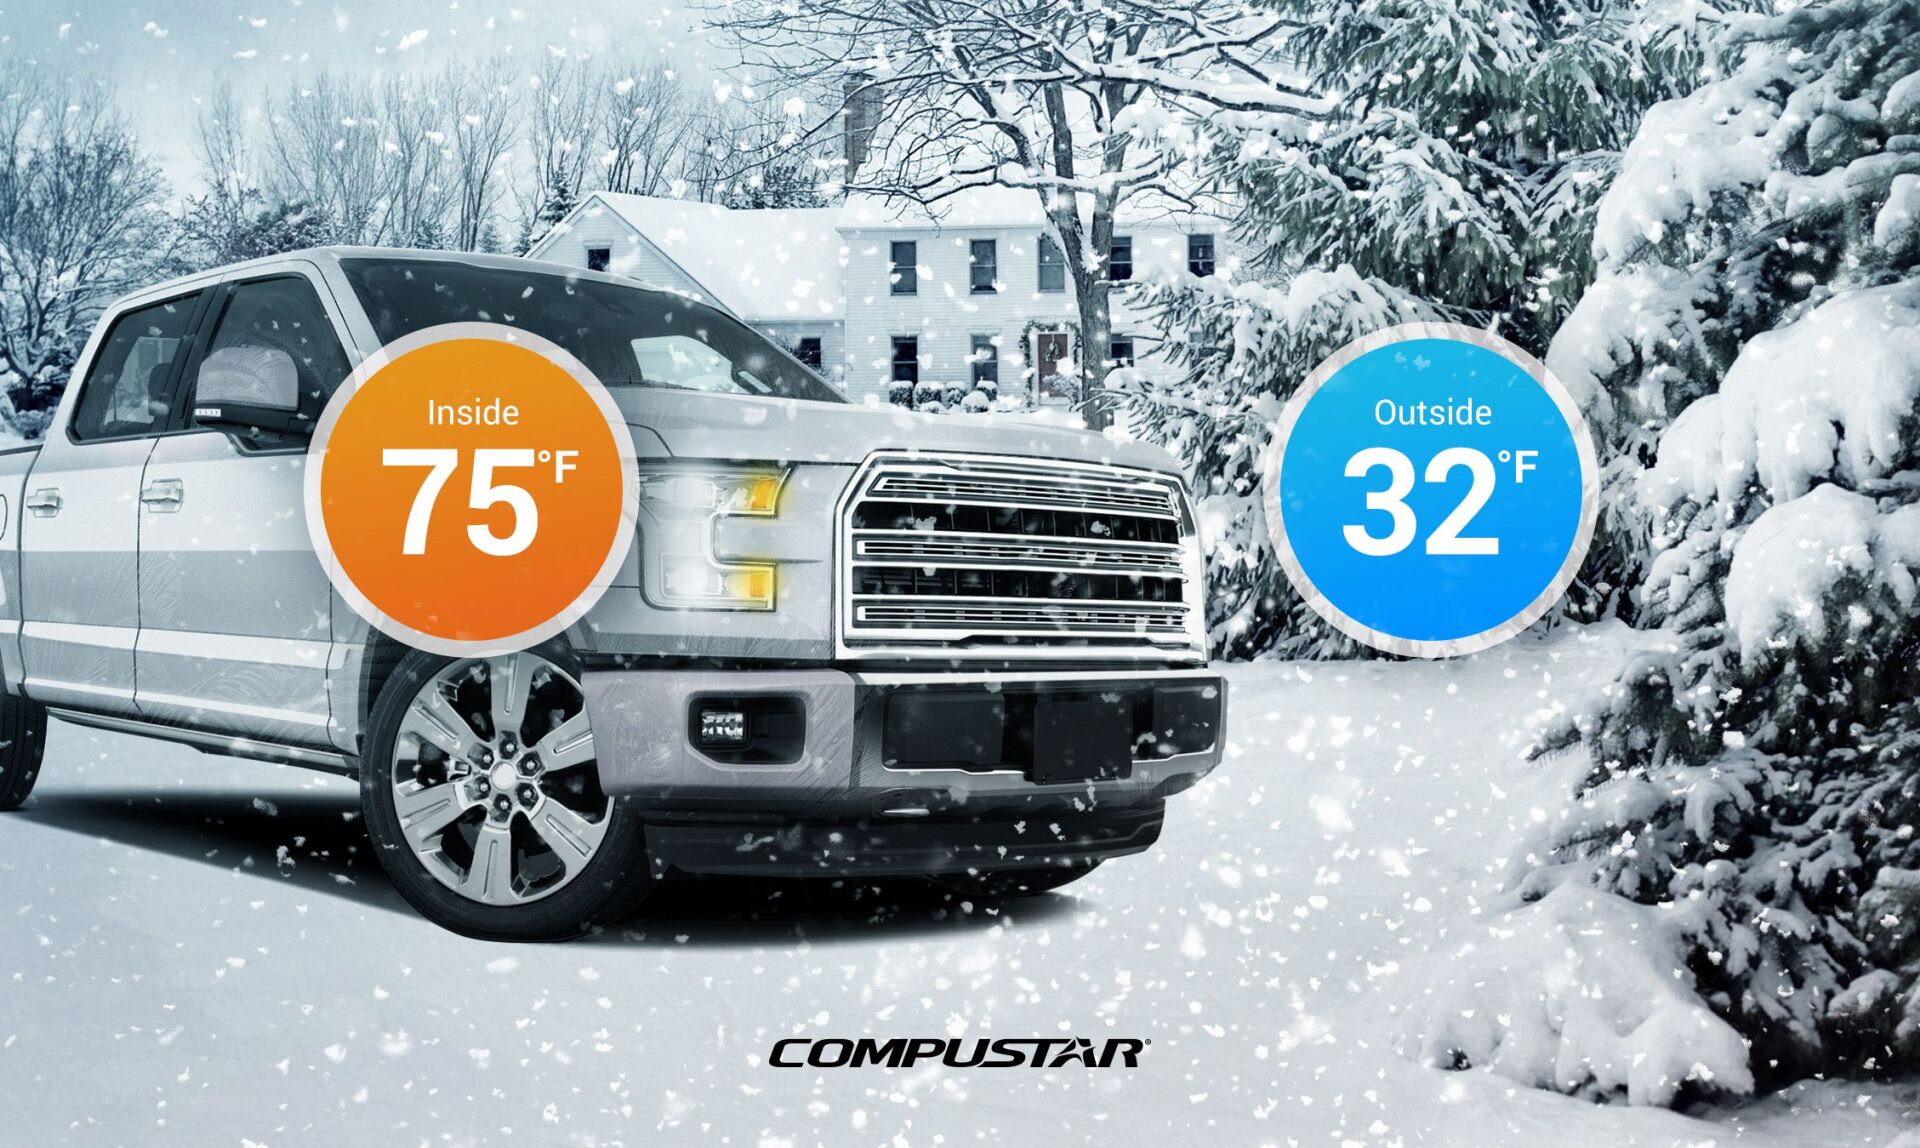 Truck in the snow with hot and cold temperature gages